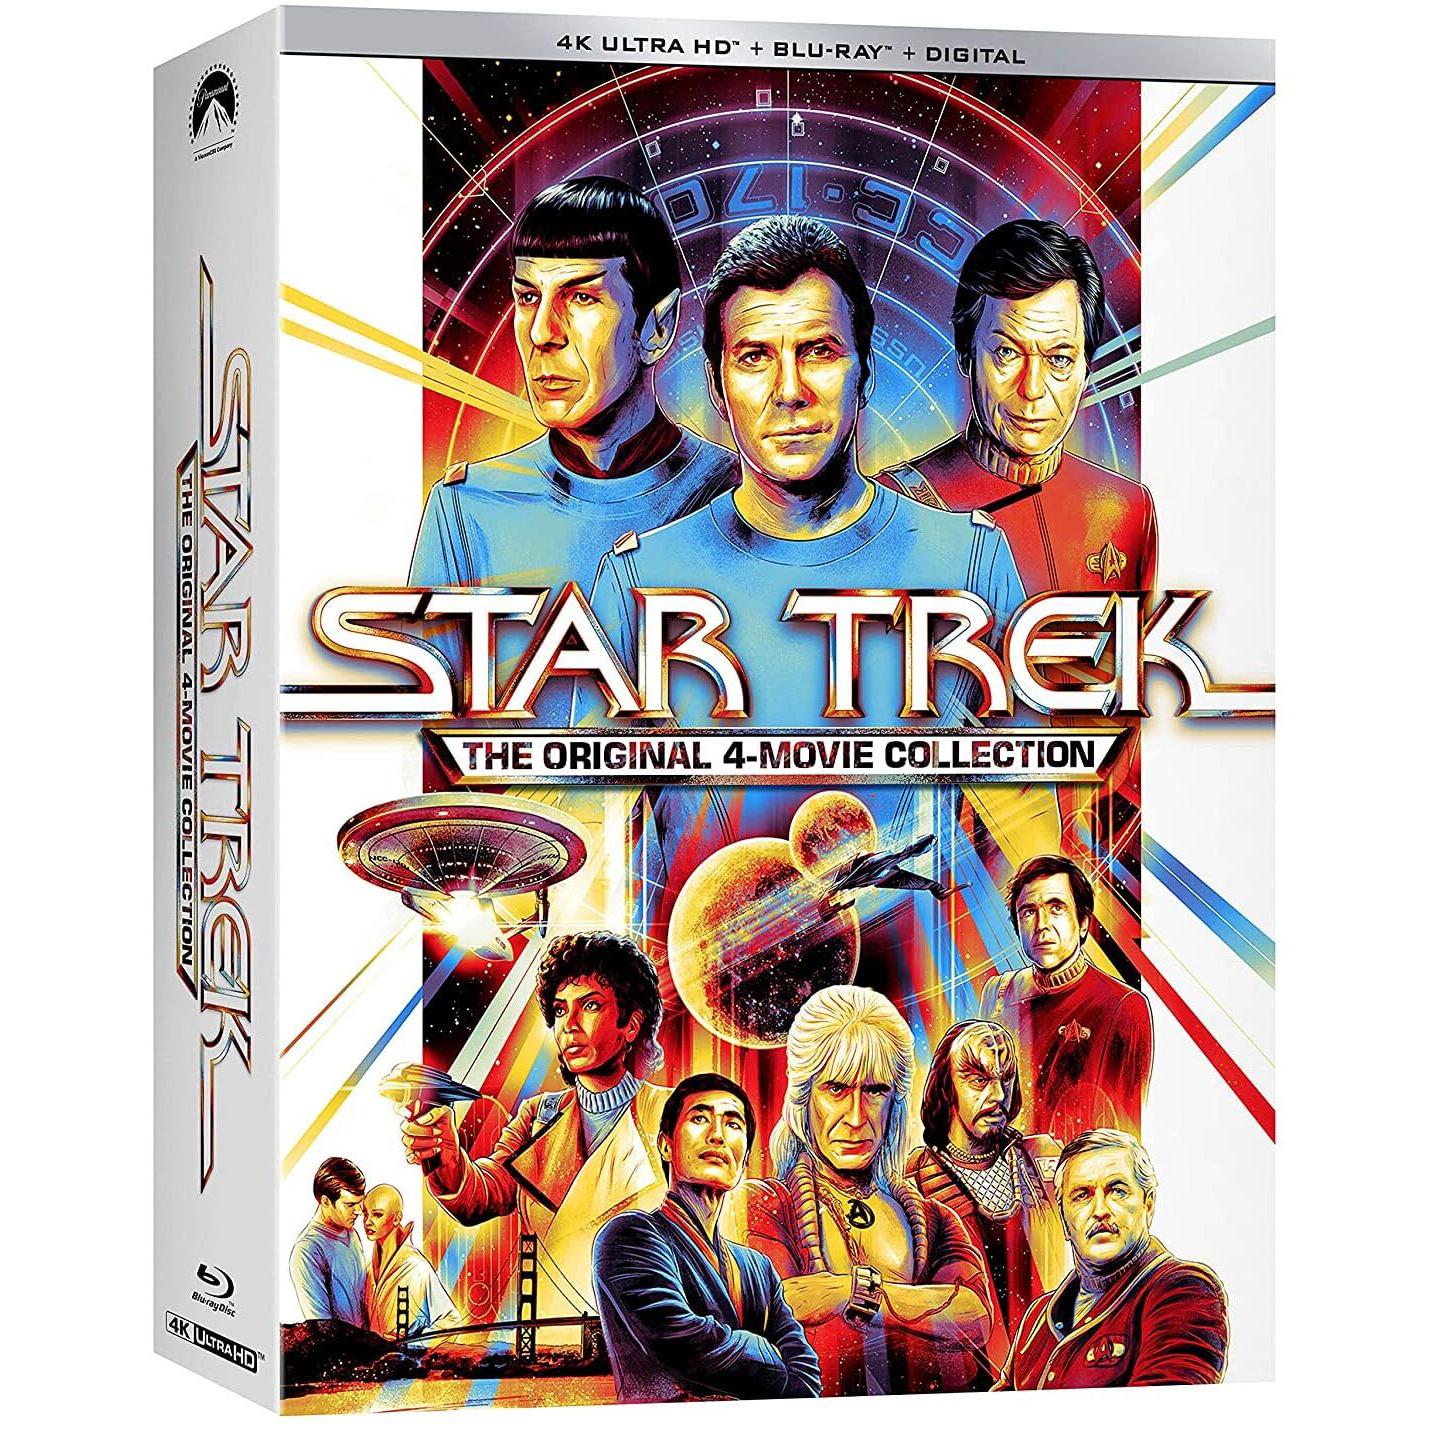 Star Trek The Original 4-Movie Collection Blu-ray for $27.99